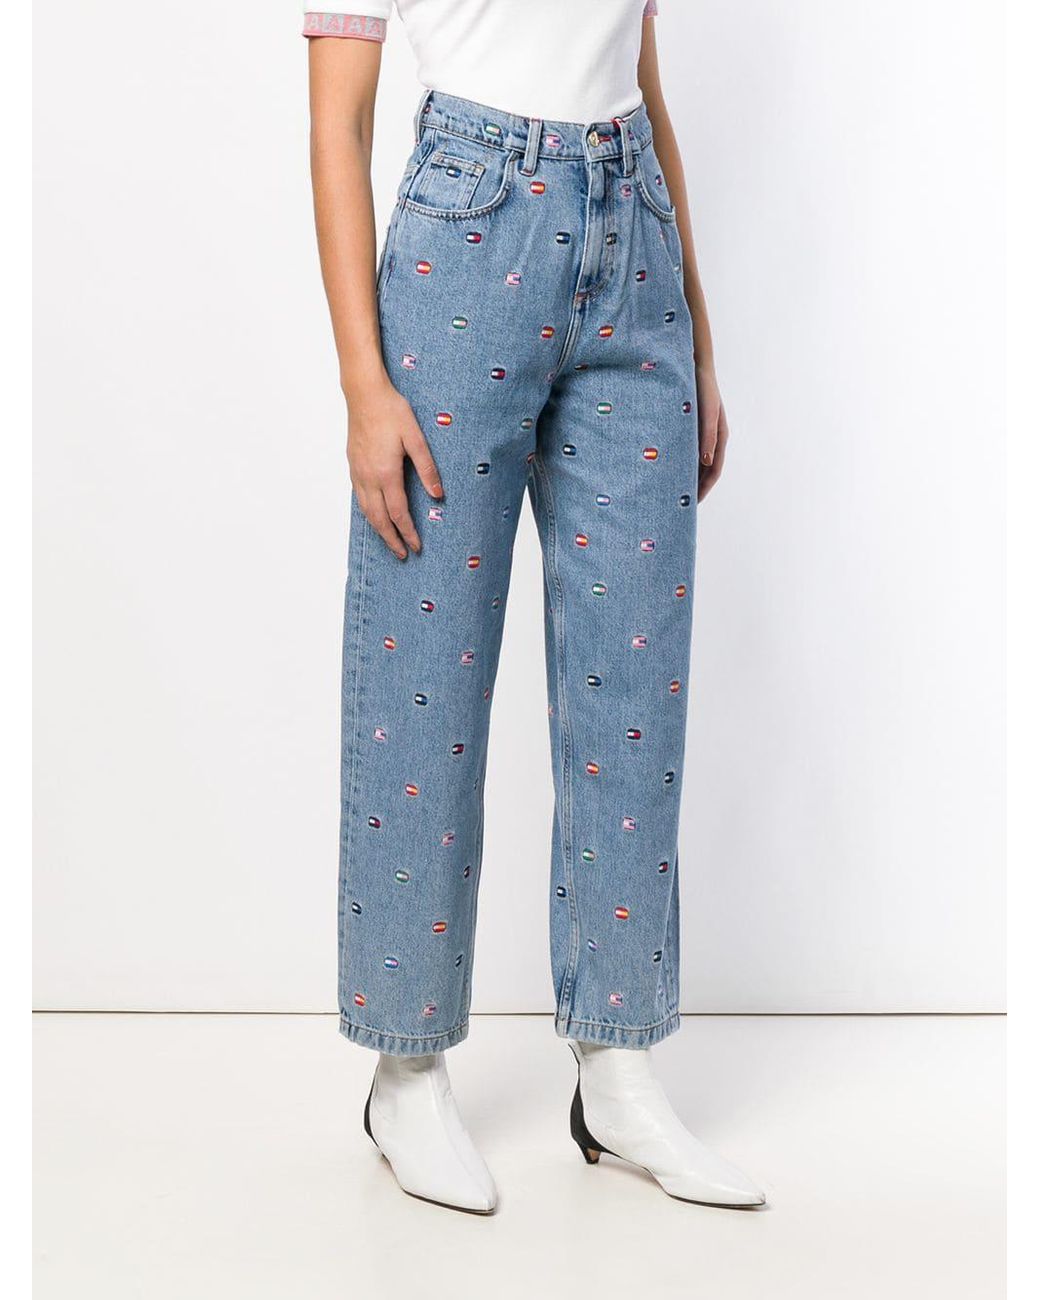 Hilfiger Logo Patch Mom Jeans in Blue | Lyst